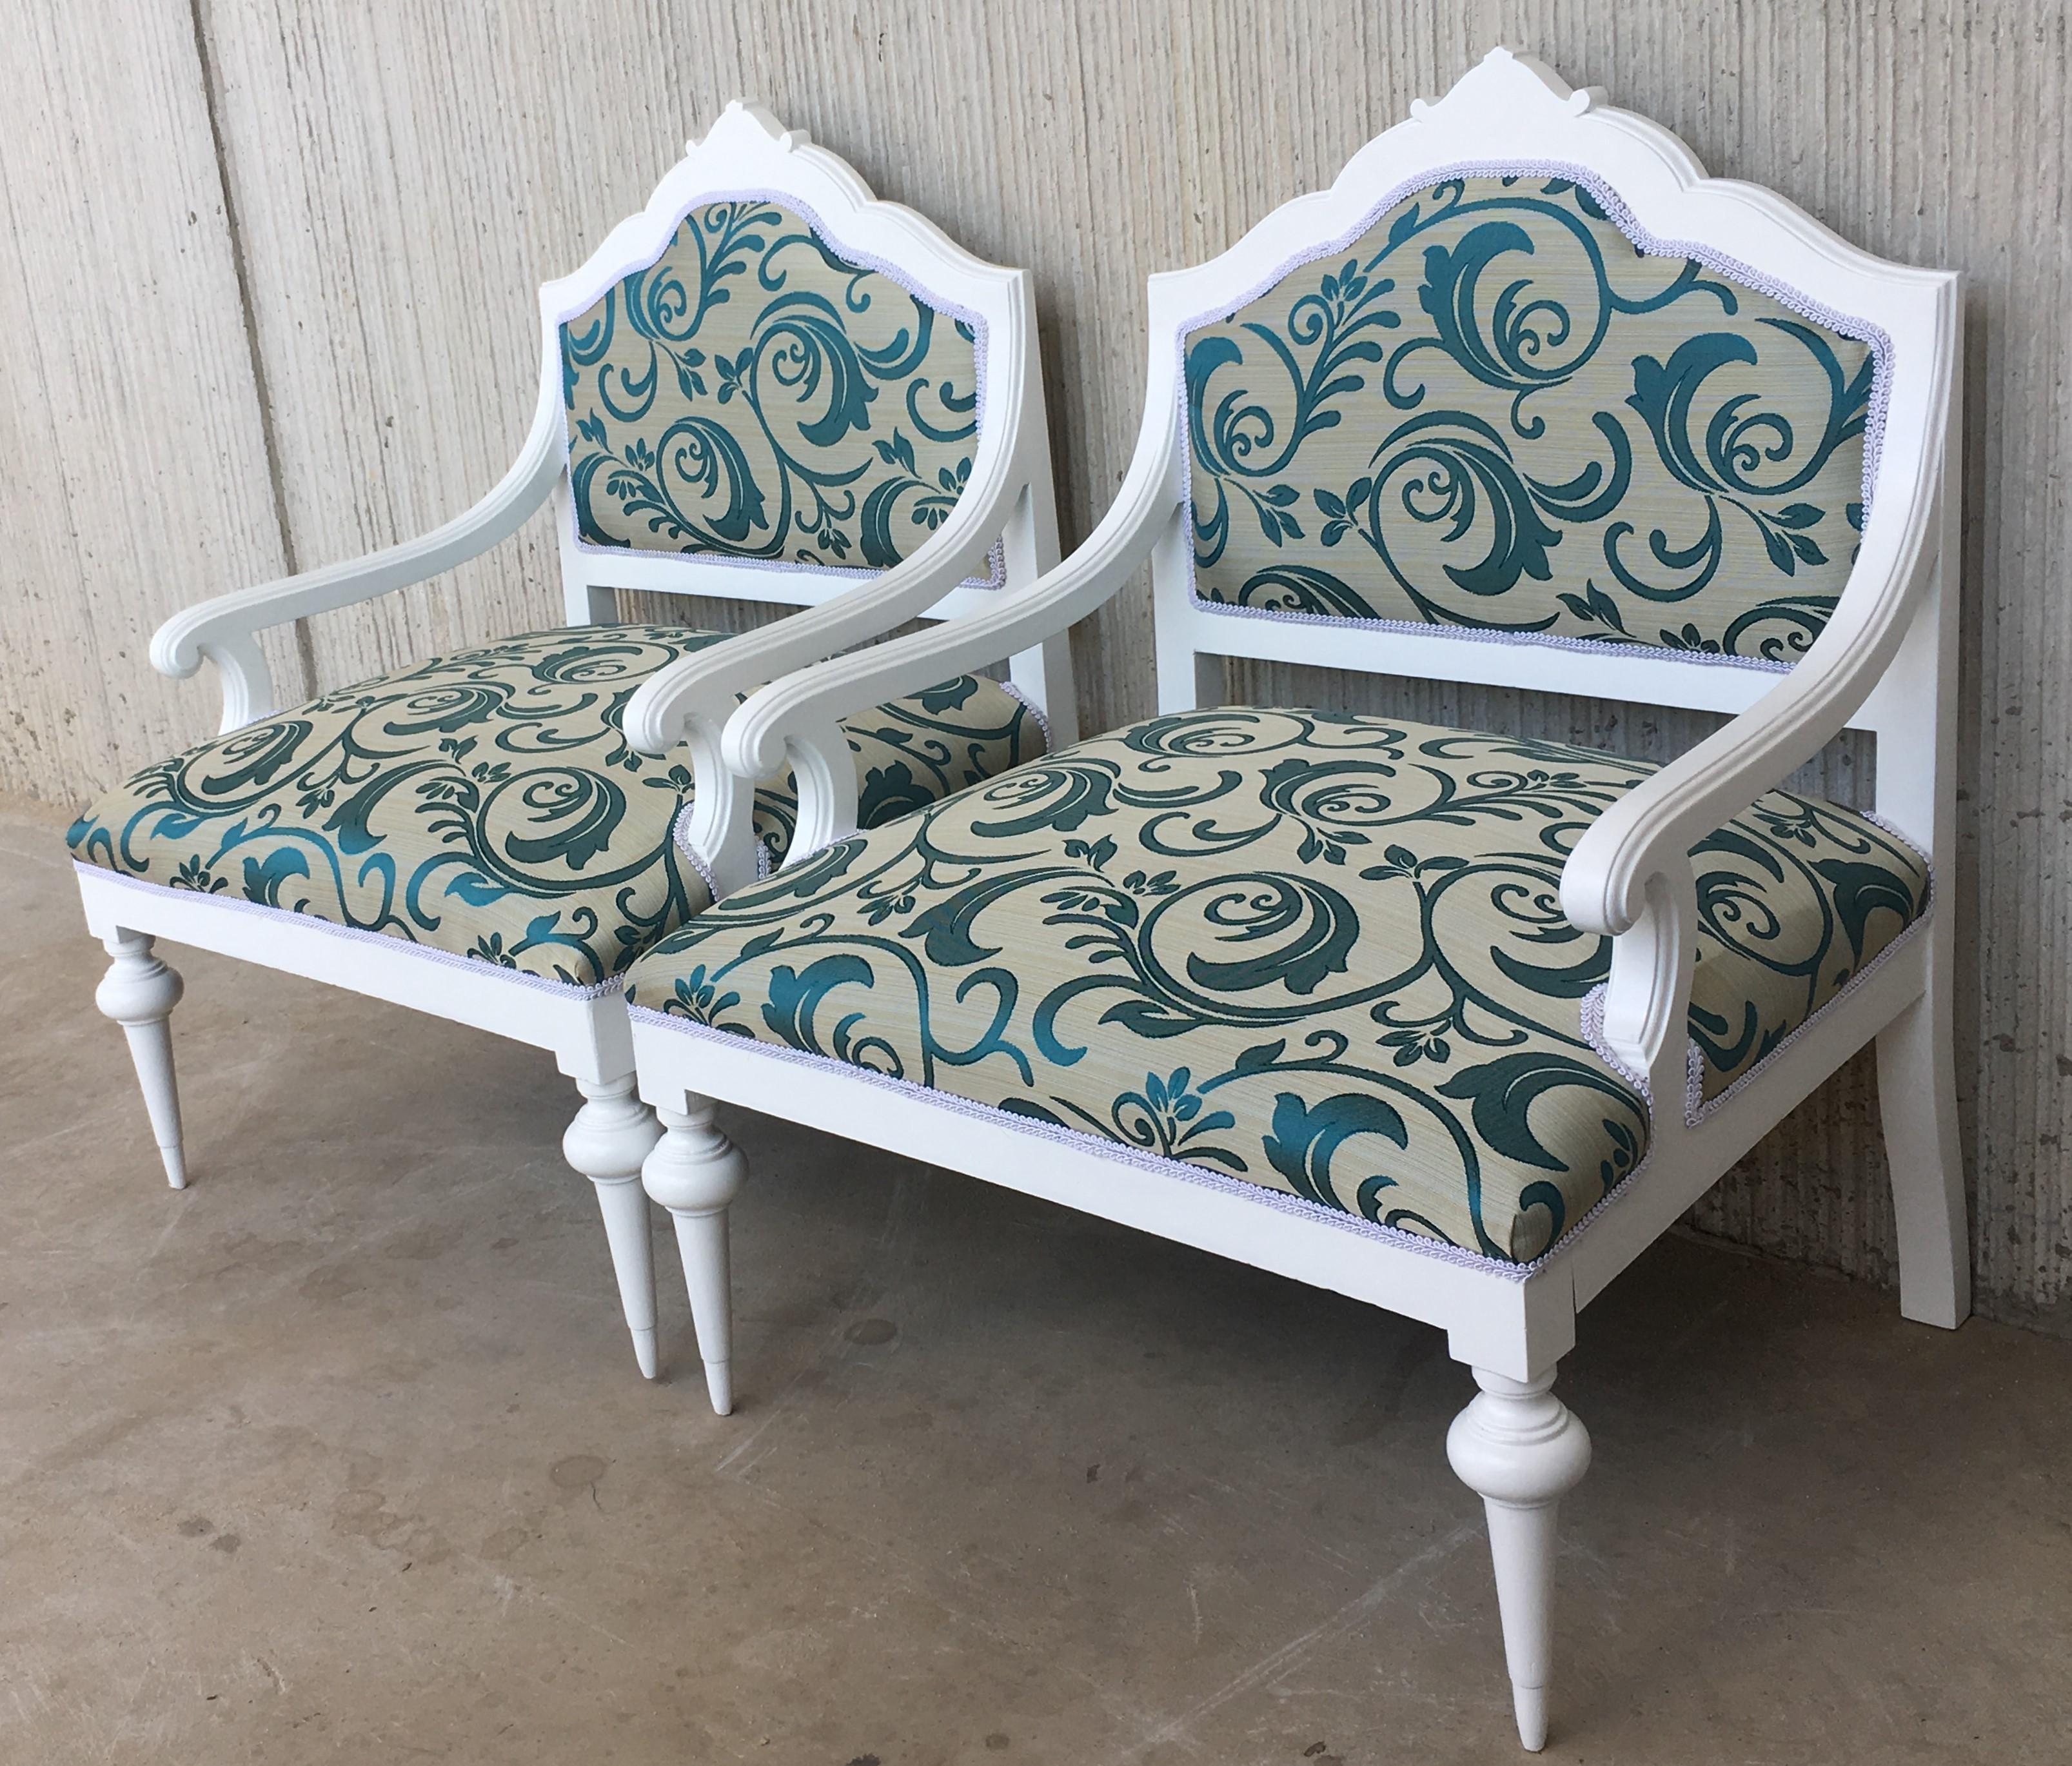 Pair of Art Noveau lounge chairs painted in white and reupholstered.
The armchairs are made of mahogany.